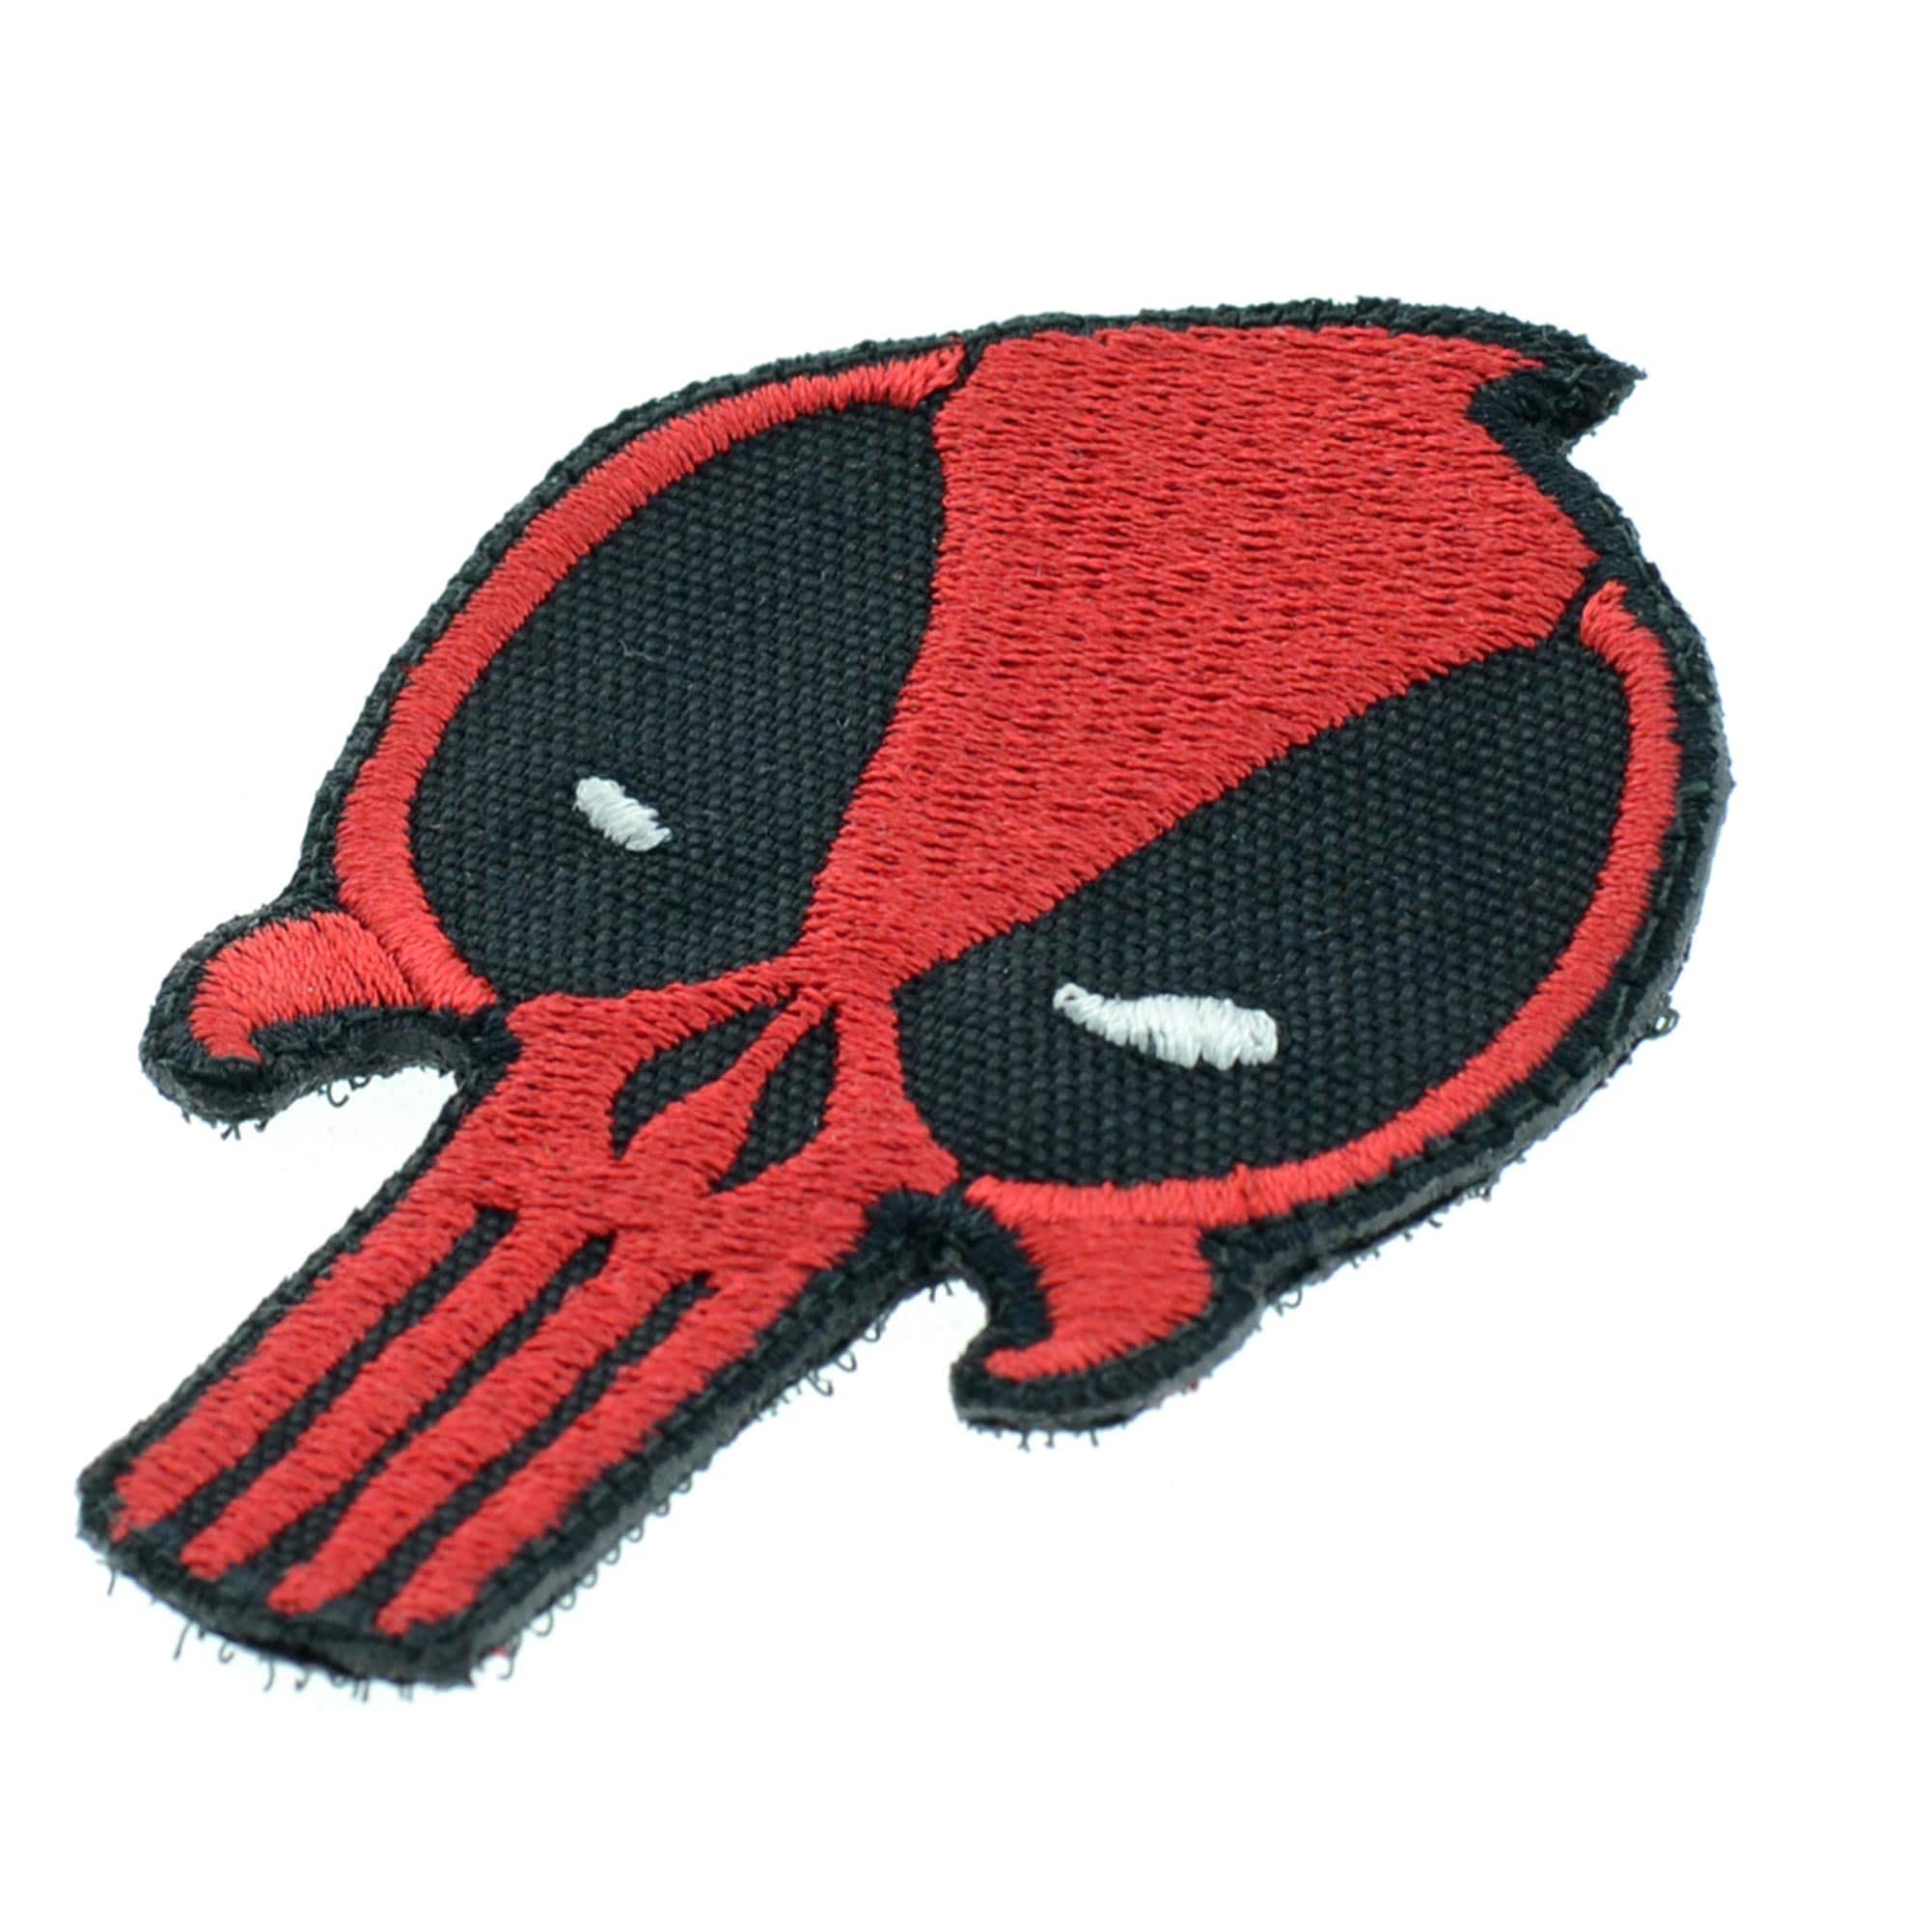 Deadpool / Punisher Morale Patch